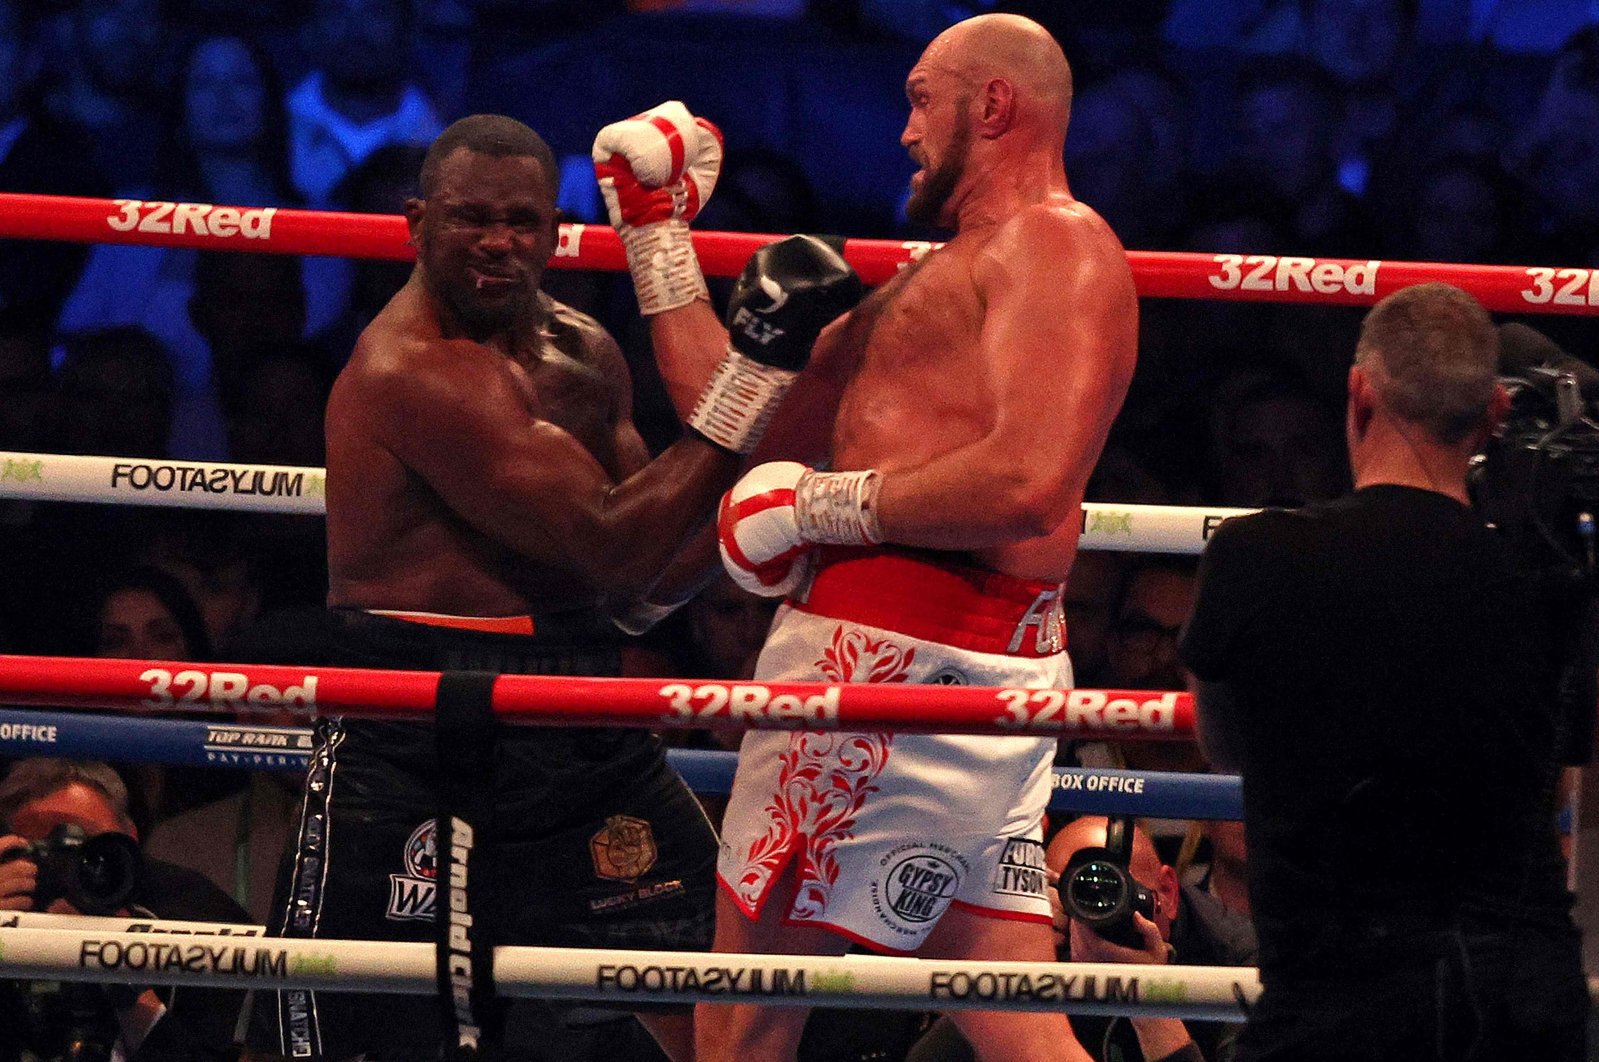 Tyson Fury (R) lands a punch to knockout Dillian Whyte in their WBC heavyweight title fight, London, England, April 23, 2022. (AFP Photo)